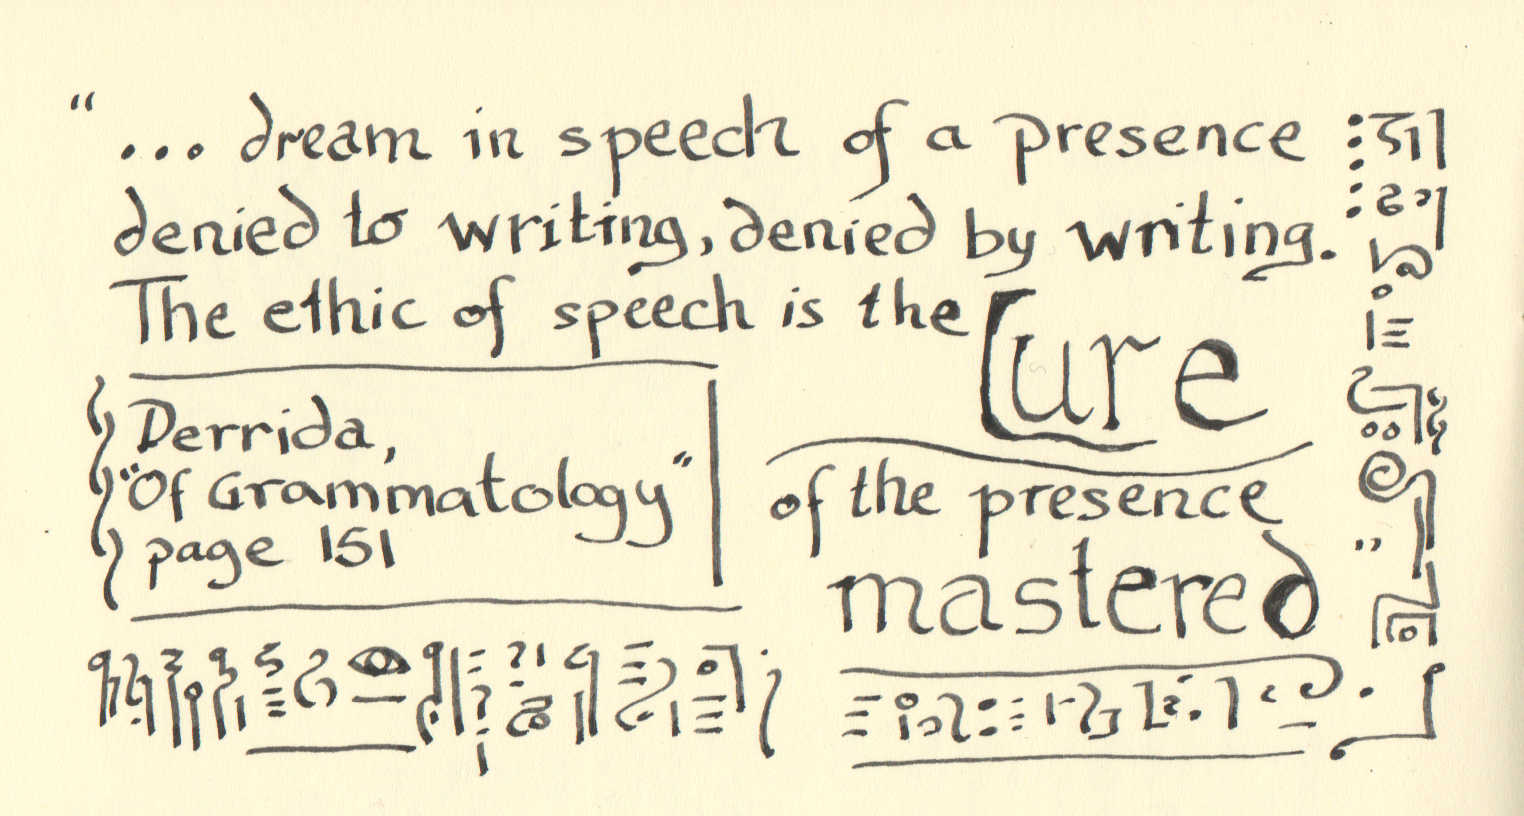 The lure of language. Ink on paper, by AK Krajewska. Image description: Calligraphied text in an ink-drawn frame "dream in speech of a presence denied to writing, denied by writing. The ethic of speech is the lure of the presence mastered." - Derrida, of Grammatology, page 151